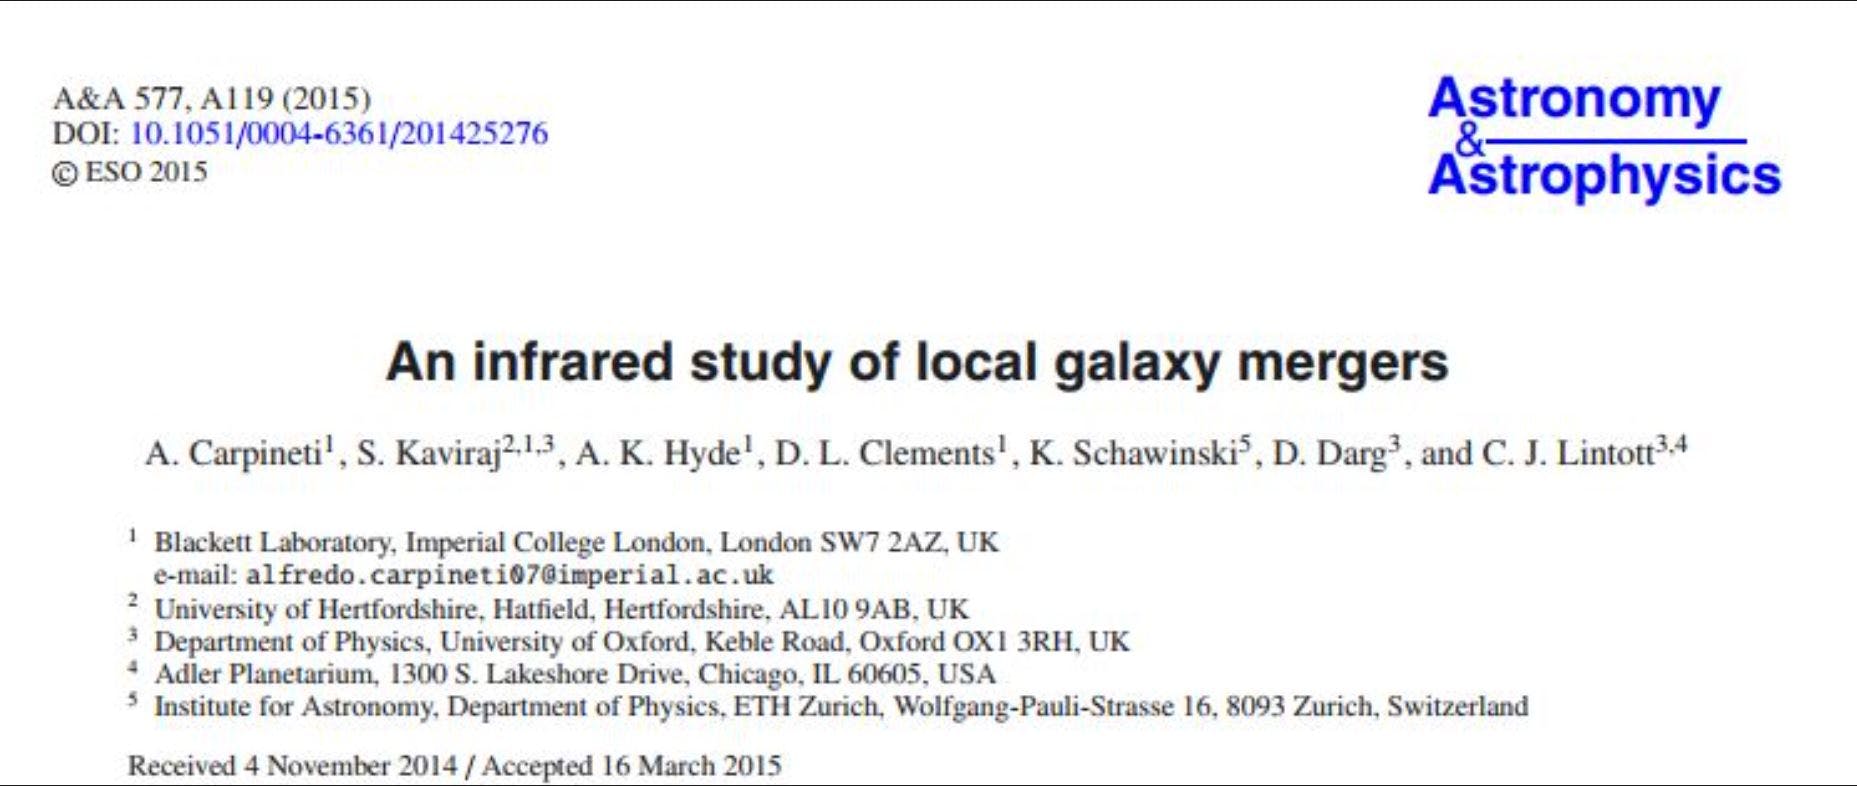 An infrared study of local galaxy mergers